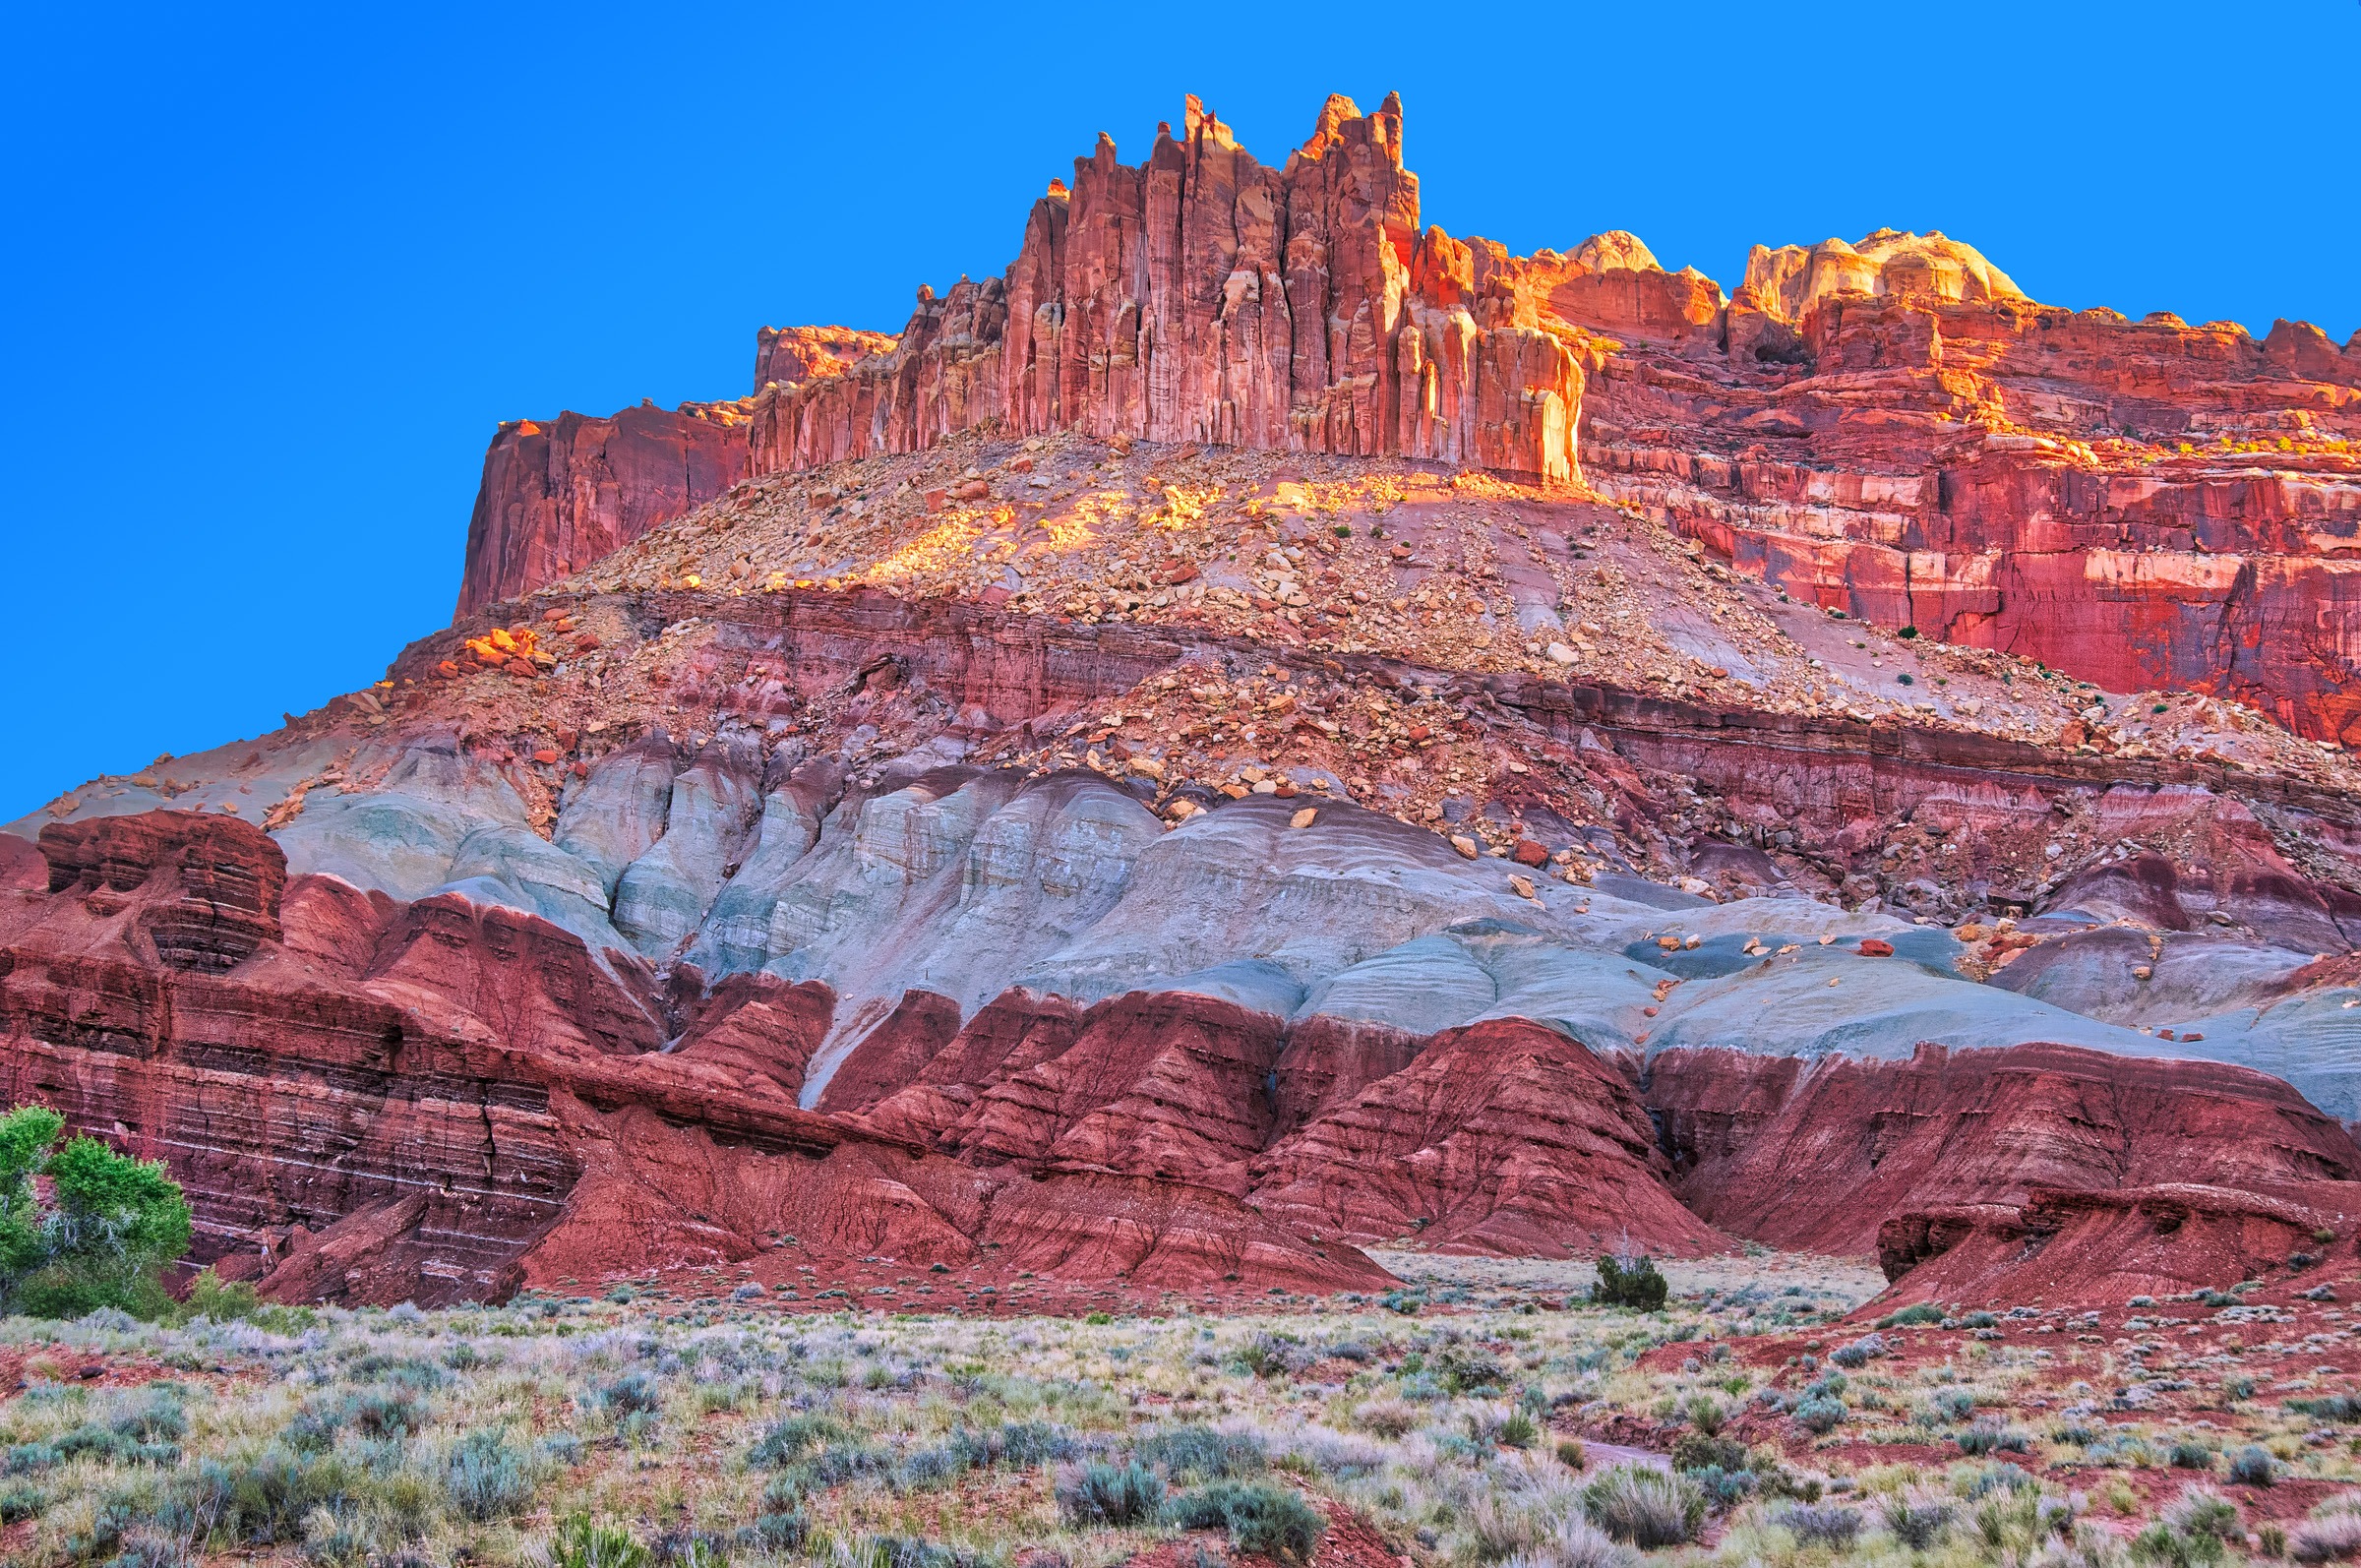 The Castle, near the Capitol Reef National Park Visitor's Center, glows in the morning light.